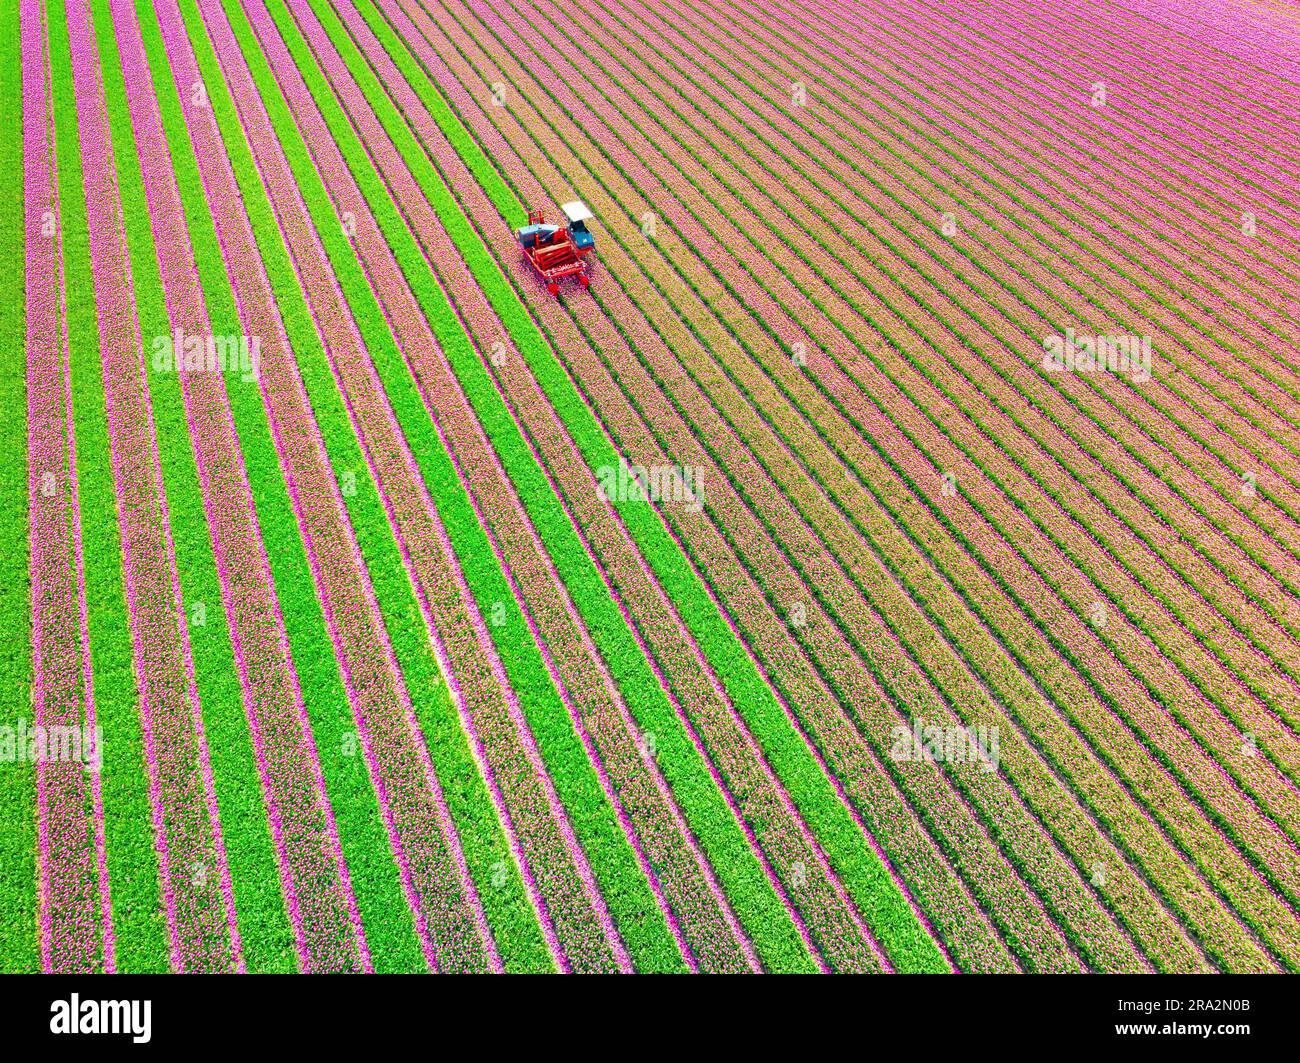 Netherlands, North Netherlands, Emmeloord, tulip field (aerial view) Stock Photo